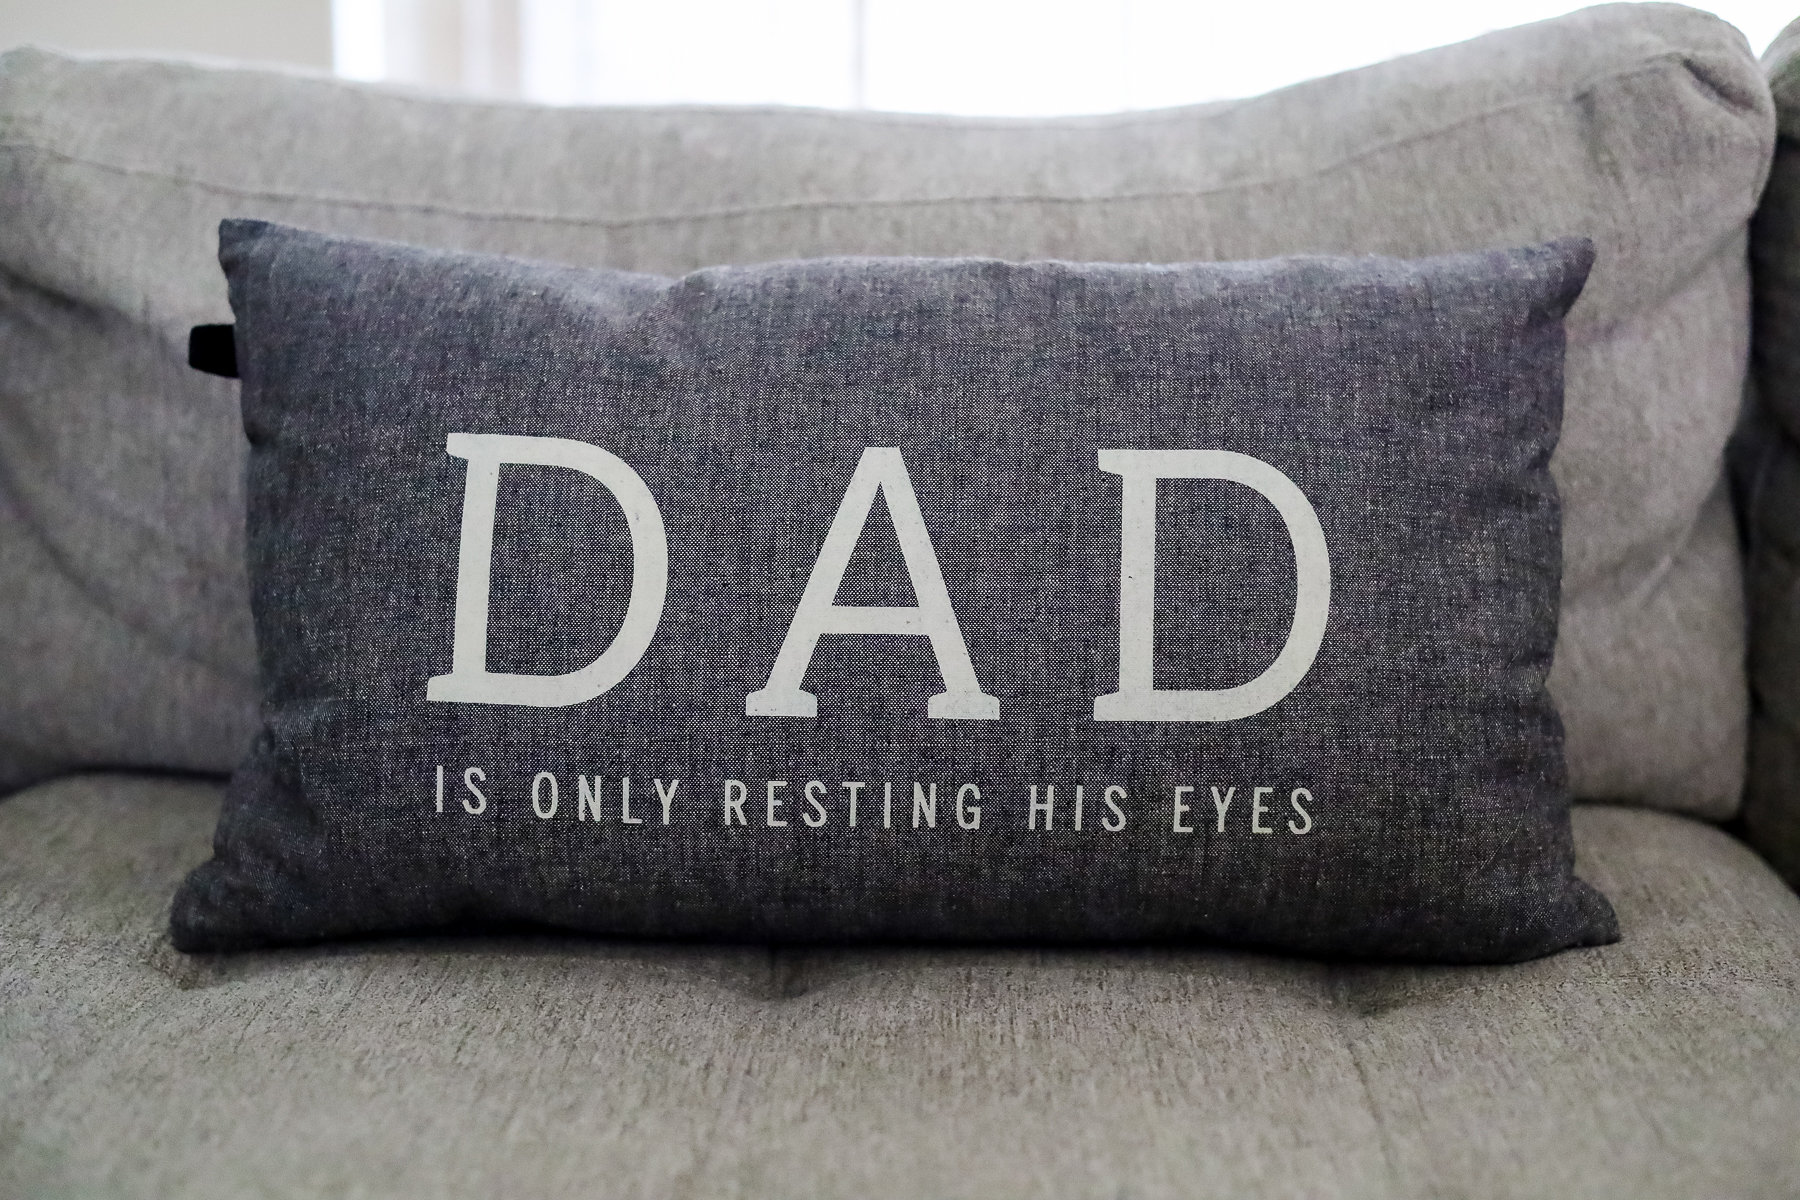 26 Father’s Day Presents For His Home And Office 